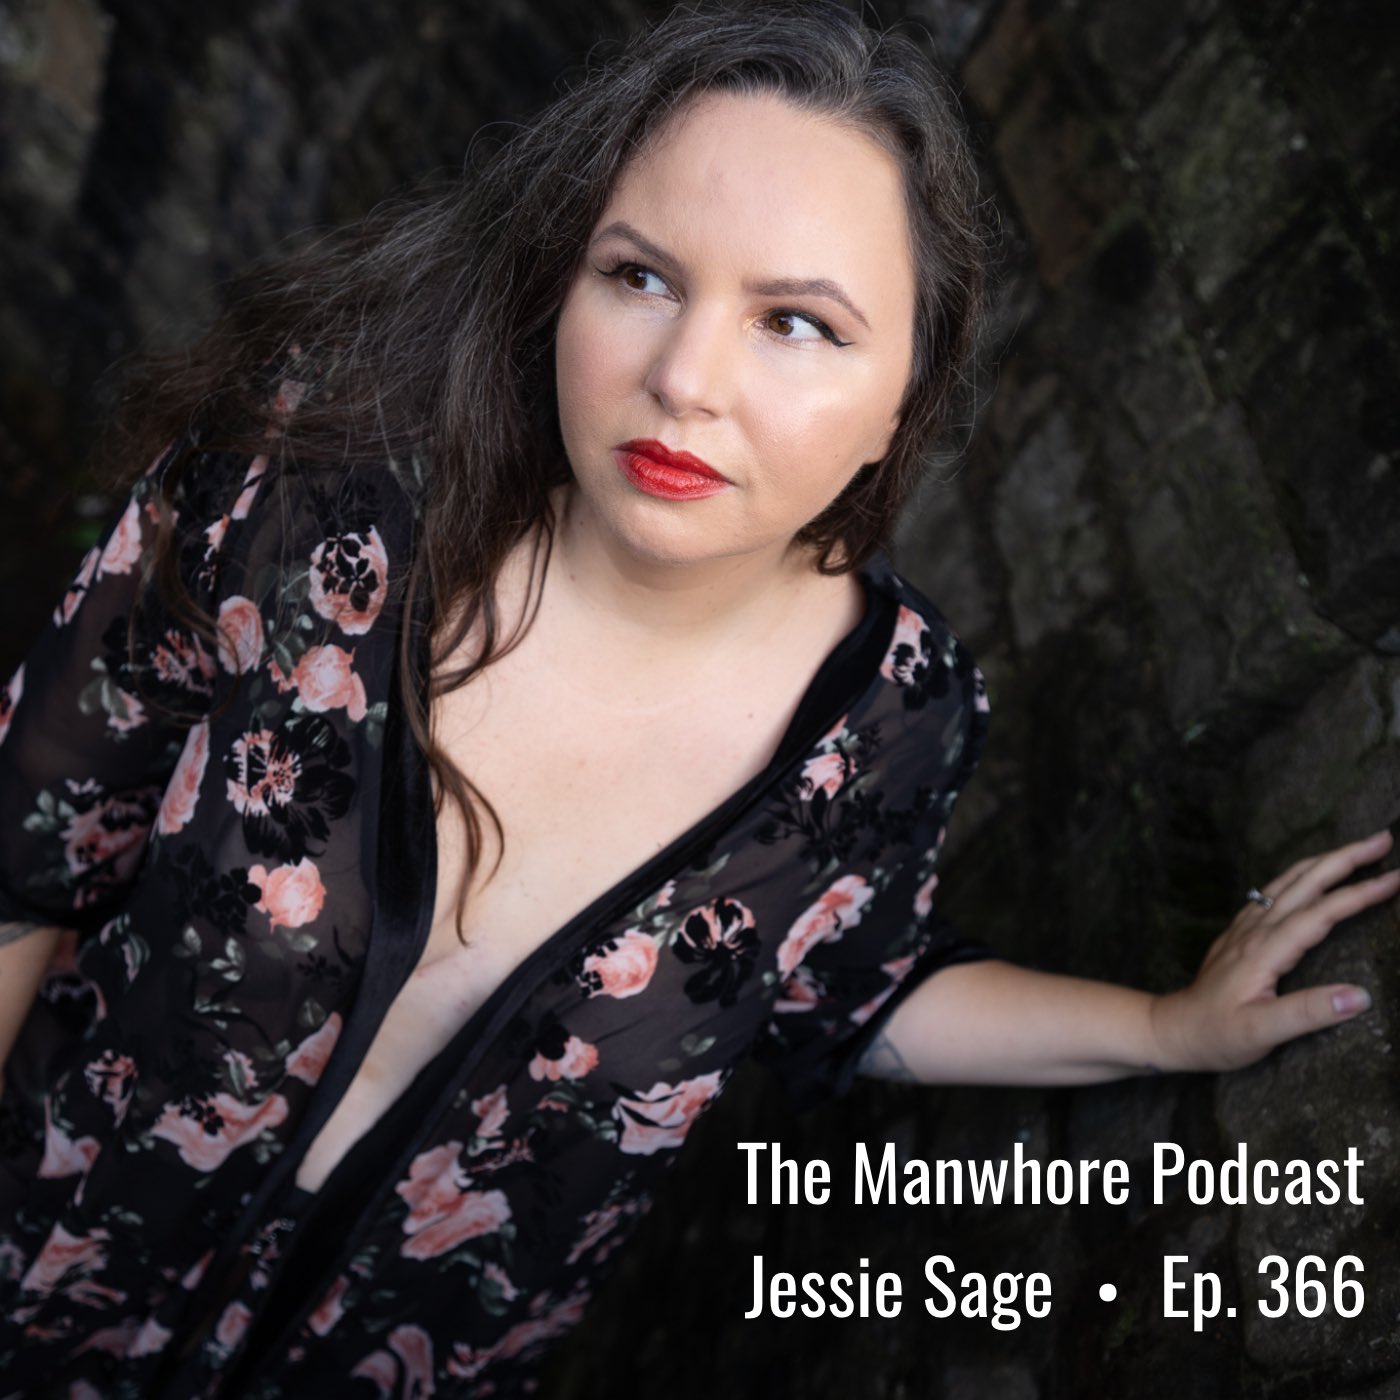 “Sex Work from Home with Jessie Sage,” Billy Pricoda for The Manwhore Podcast (Podcast Appearance)